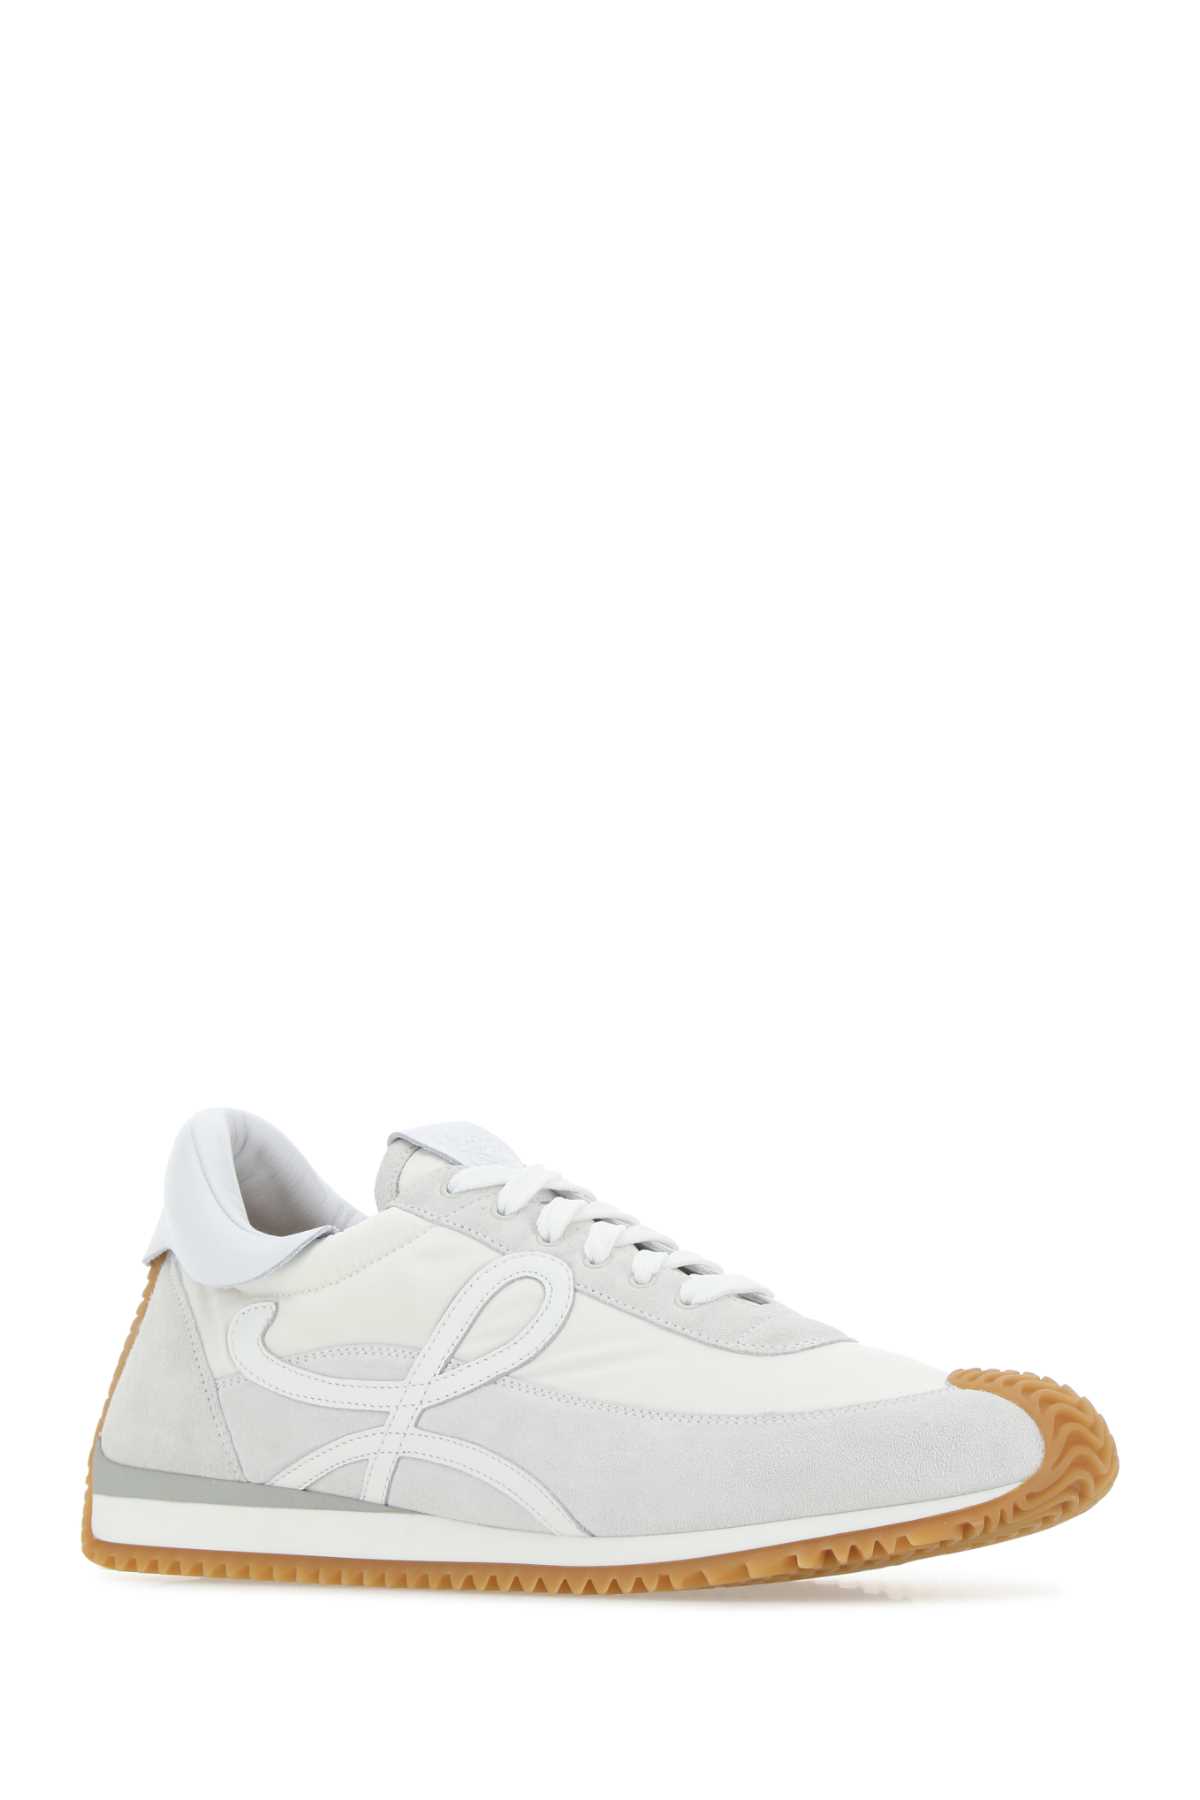 Loewe Multicolor Fabric And Suede Ballet Sneakers In White